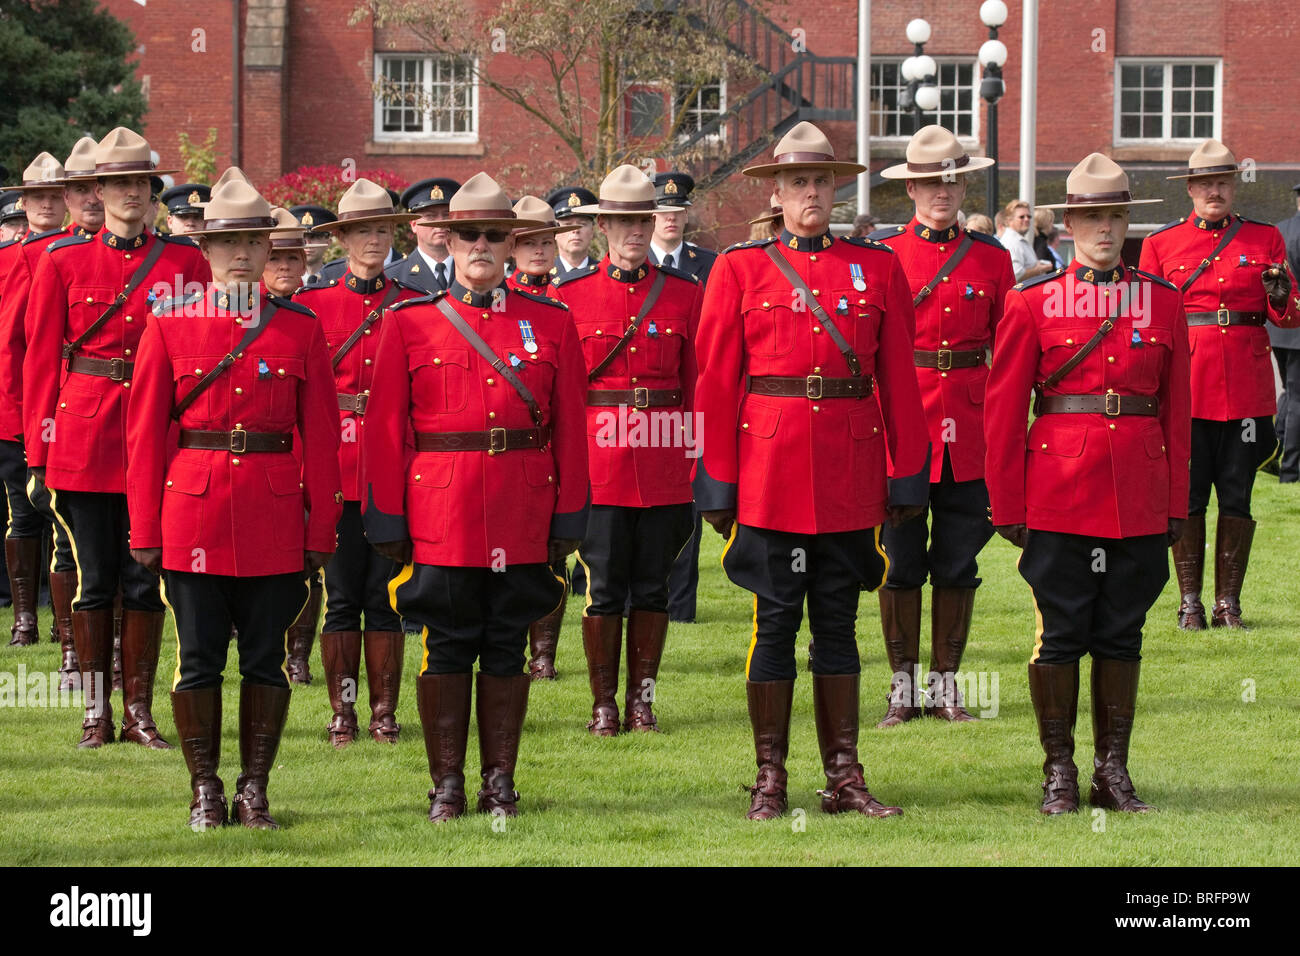 Royal Canadian Mounted Police at Annual Police officers Memorial service-Victoria, British Columbia, Canada. Stock Photo